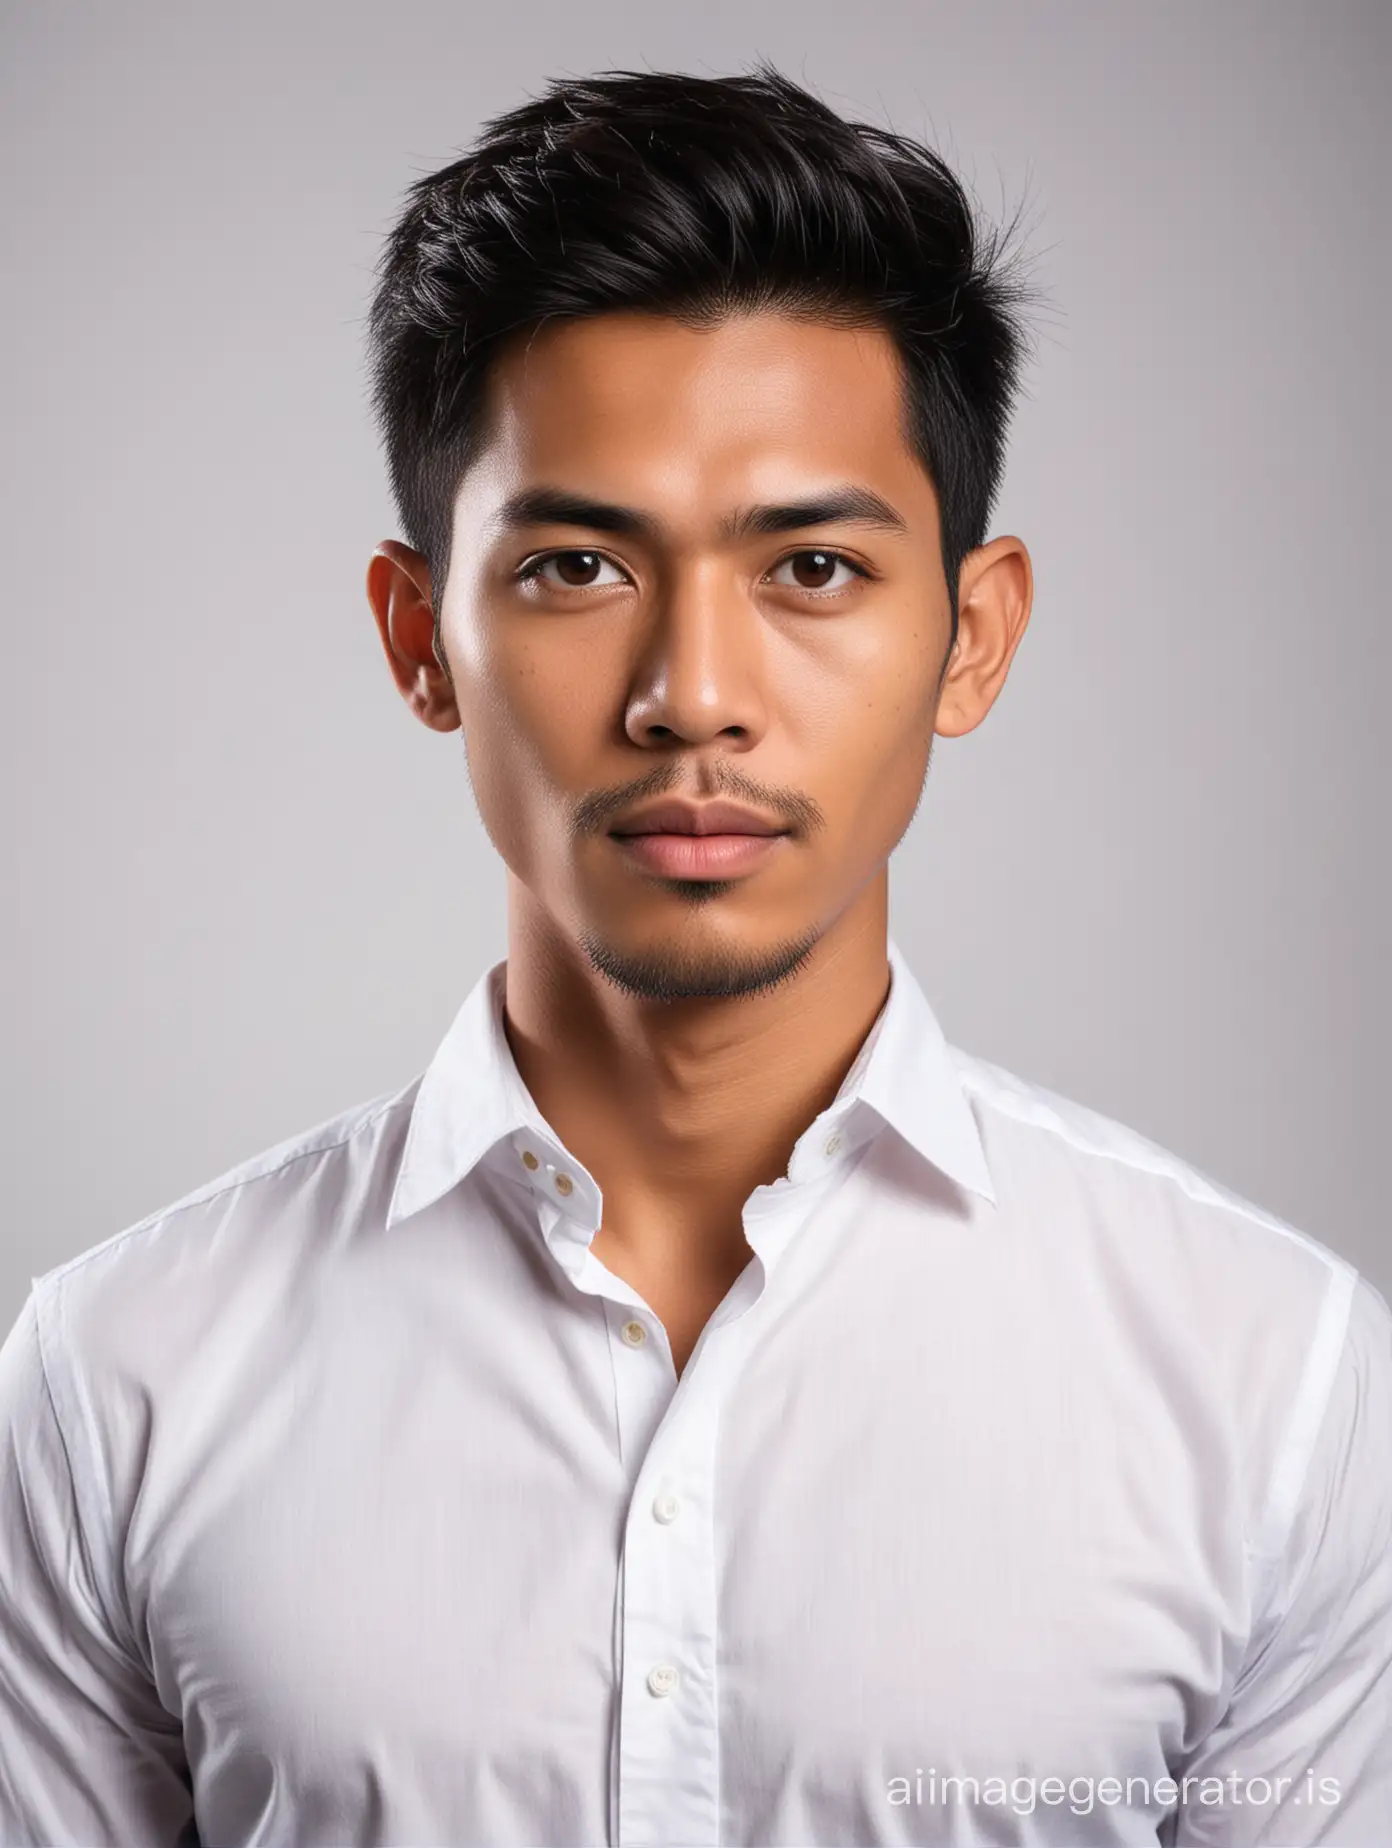 Handsome indonesian man, wearing white long sleeve shirt, posing for a passport photo.  Head straight looking at the camera. Serious face.